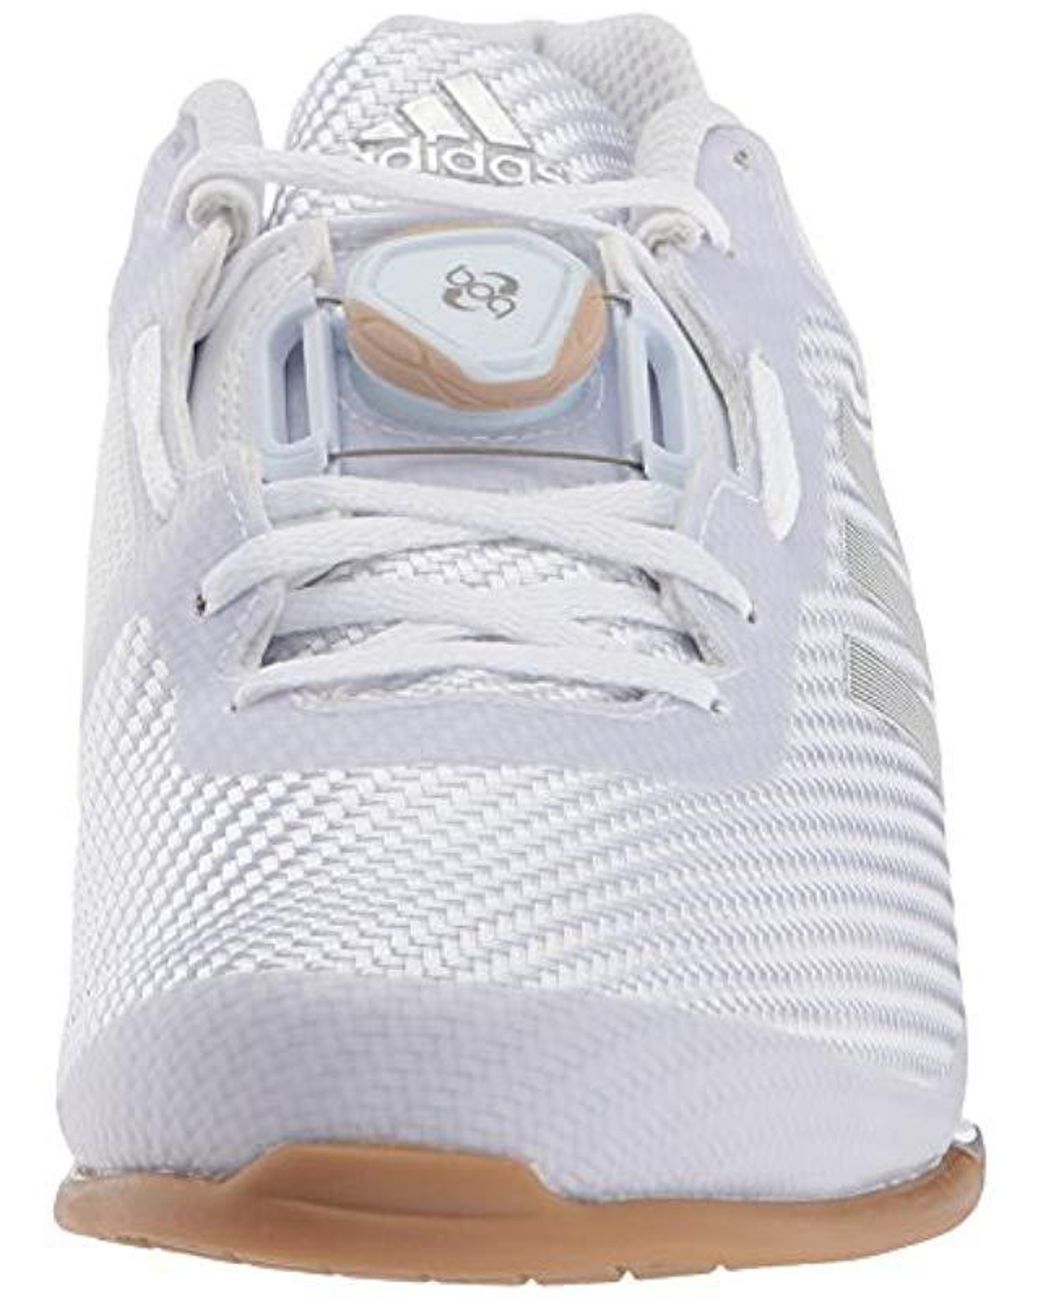 Adjust Adidas LEISTUNG.16 2 II Weightlifting Shoes White/Silver Metallic  Lace innovatis-suisse.ch